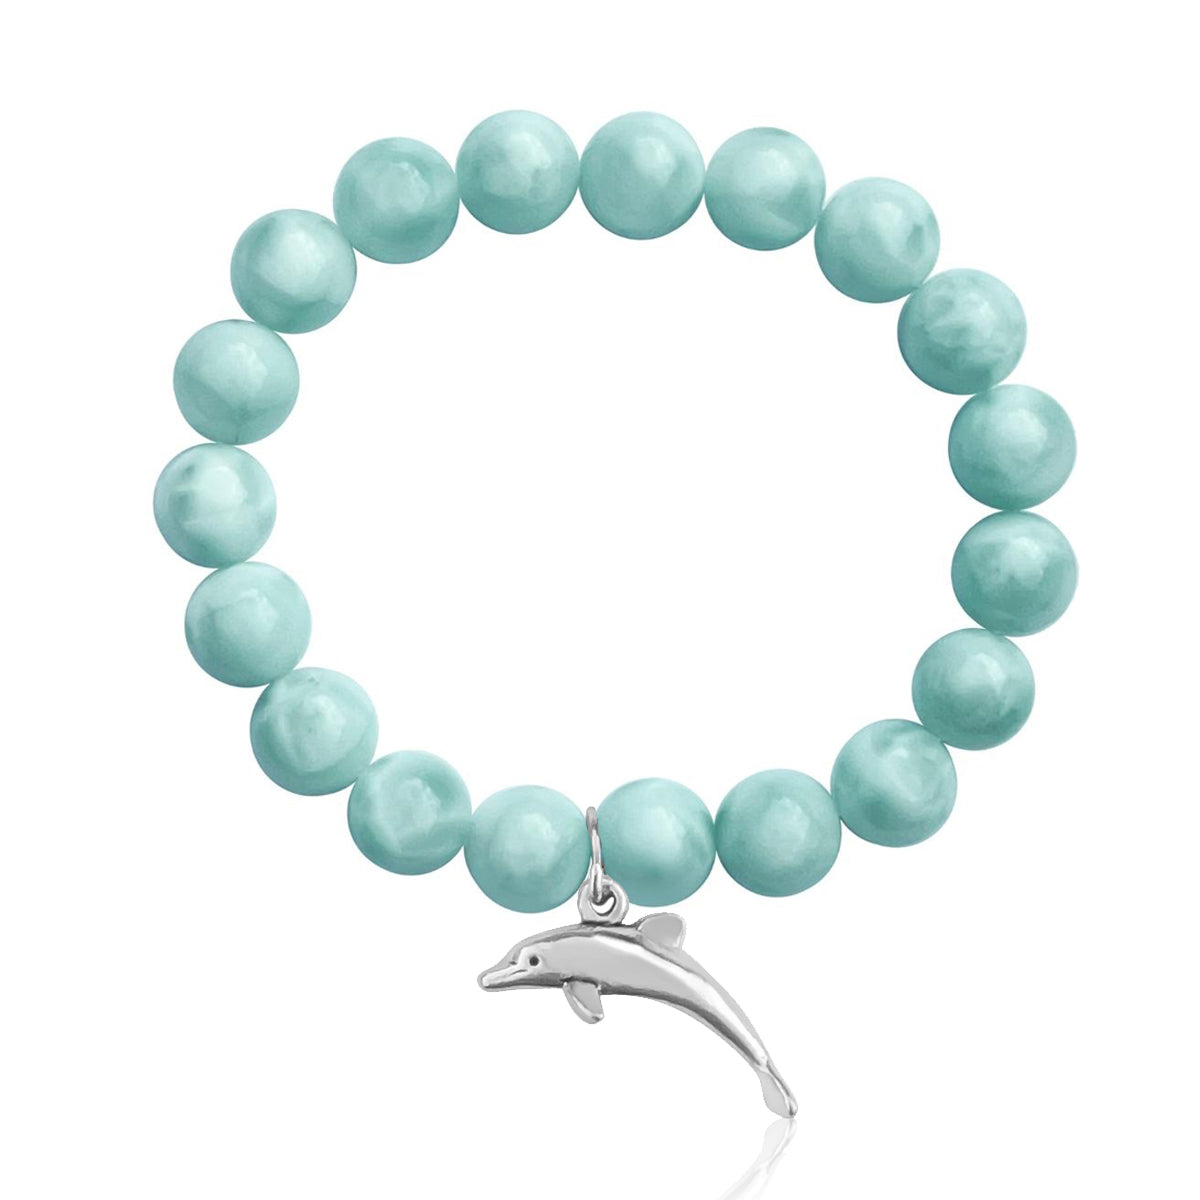 Whether you're a beach lover seeking a touch of coastal magic or a spiritual seeker embracing the tranquility of the ocean, the Dolphin Spirit Bracelet is sure to inspire and uplift your soul.